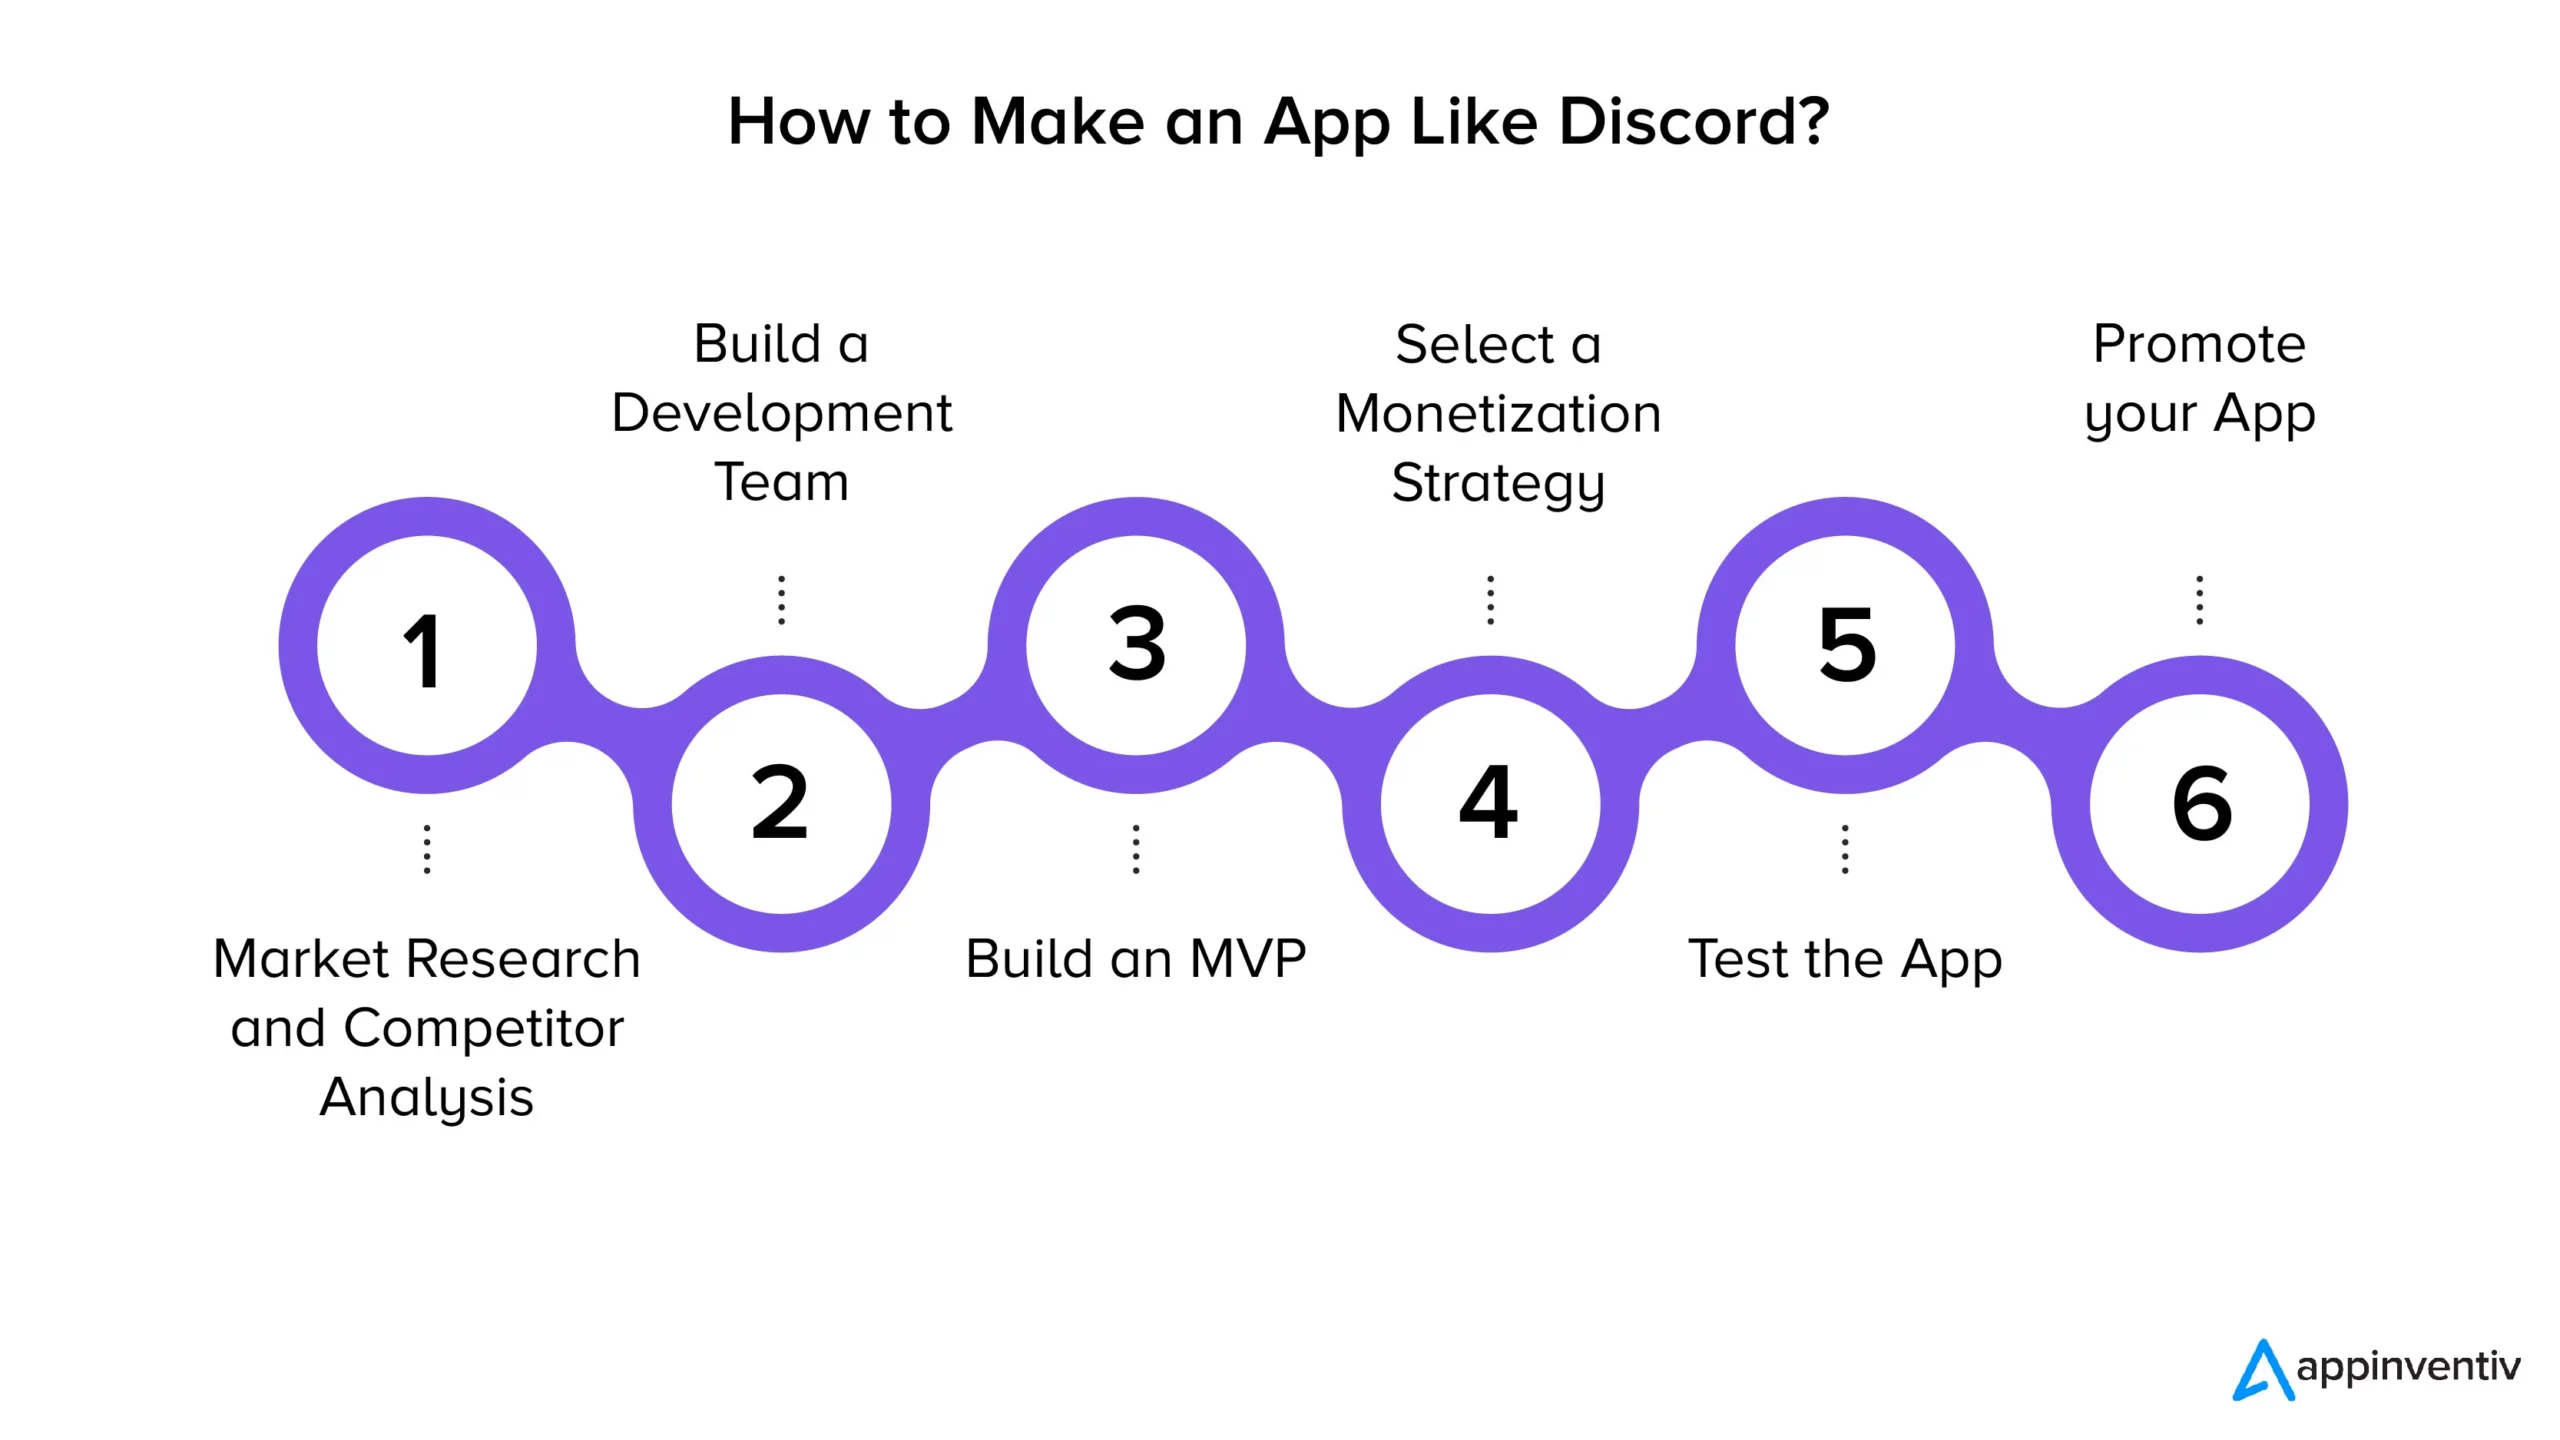 Guide to Making an App Like Discord